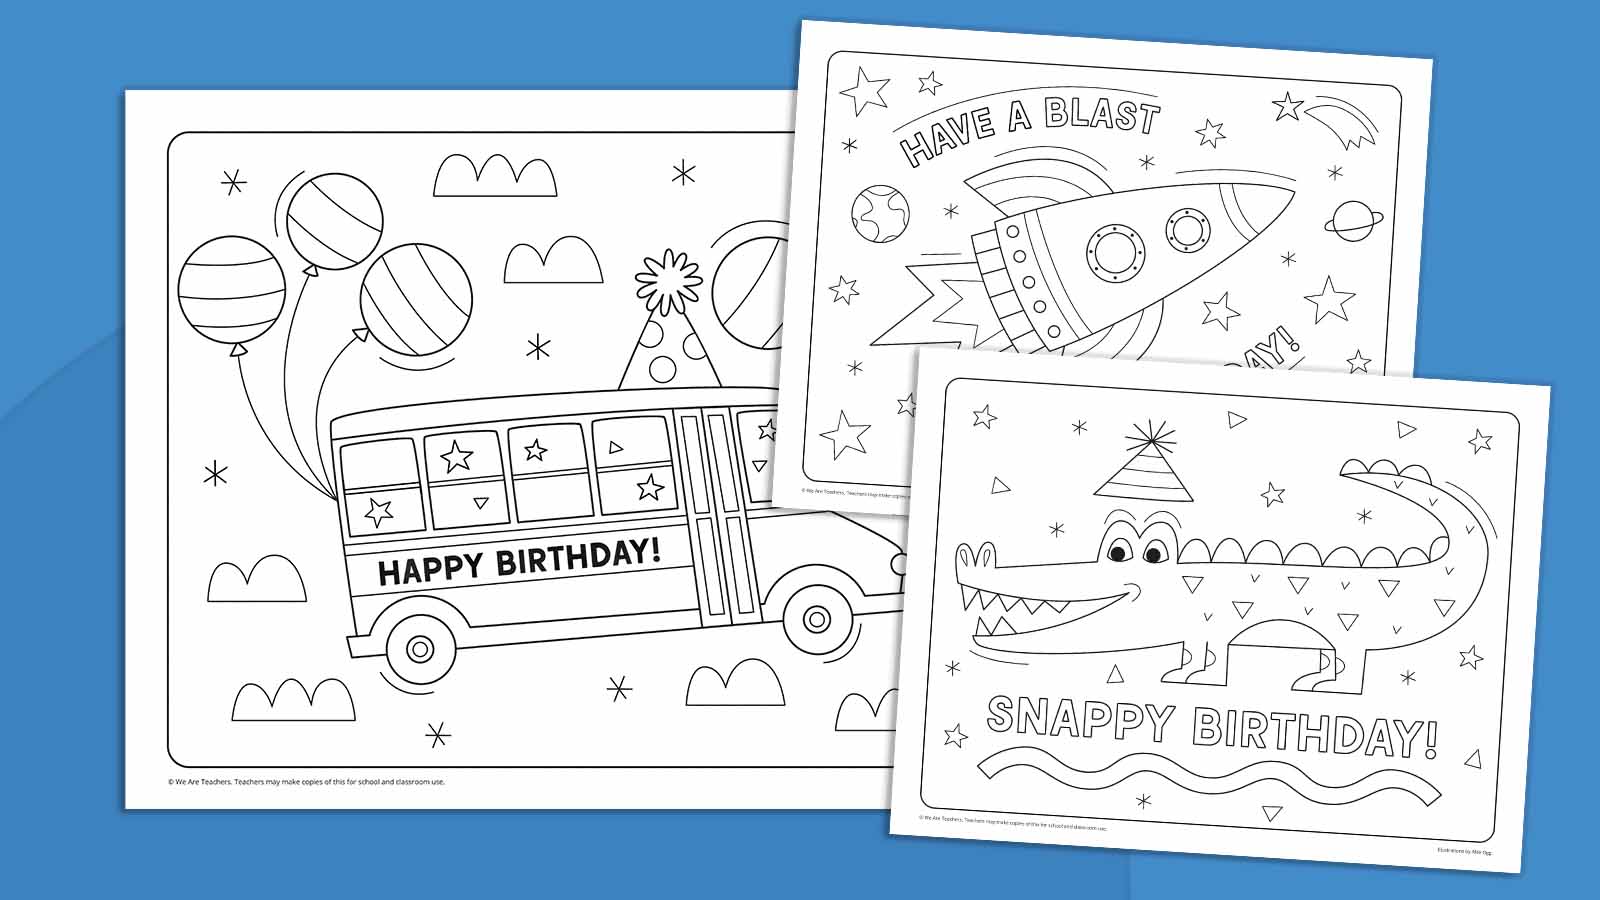 Happy Birthday Coloring Pages: Grab Our Free Download - We Are Teachers